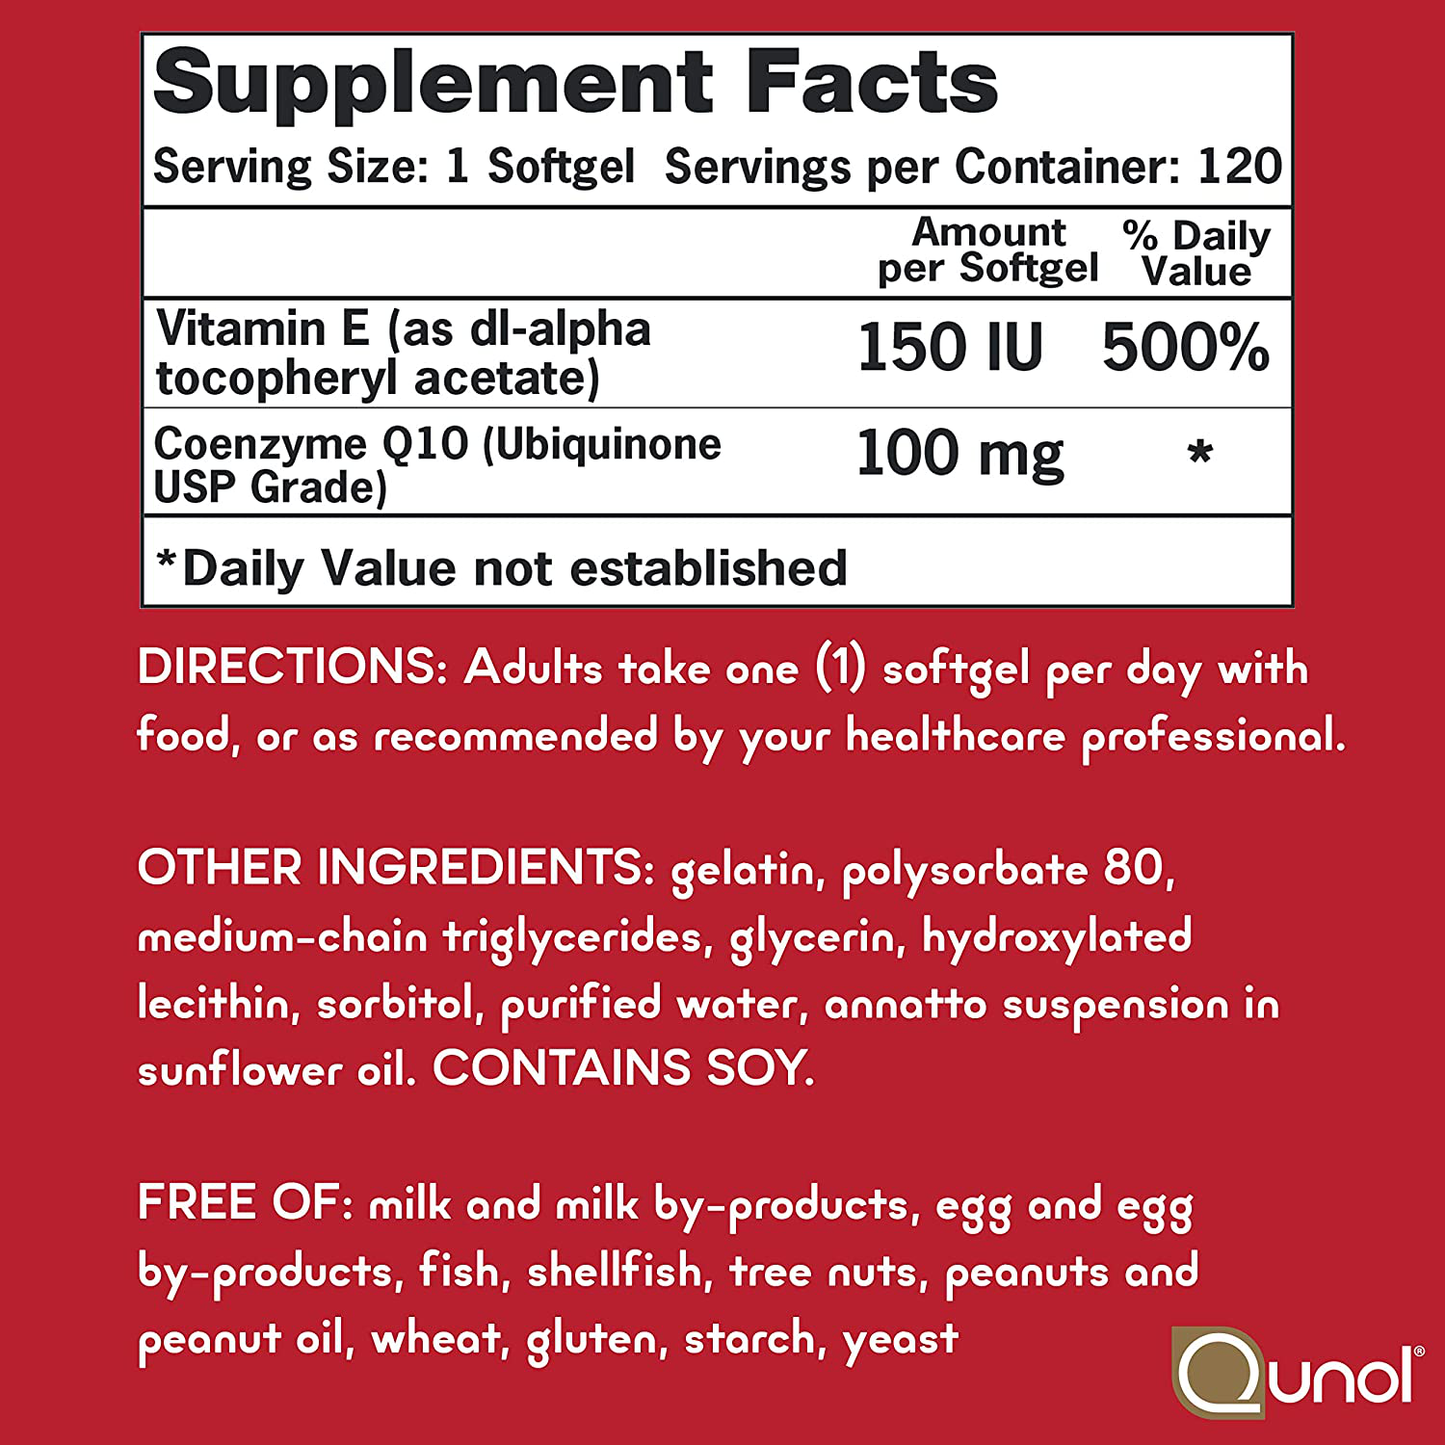 Qunol Ultra CoQ10 100mg 3X Better Absorption Patented Water and Fat Soluble Natural Supplement Form Coenzyme Q10 Antioxidant for Heart Health Packs Softgels